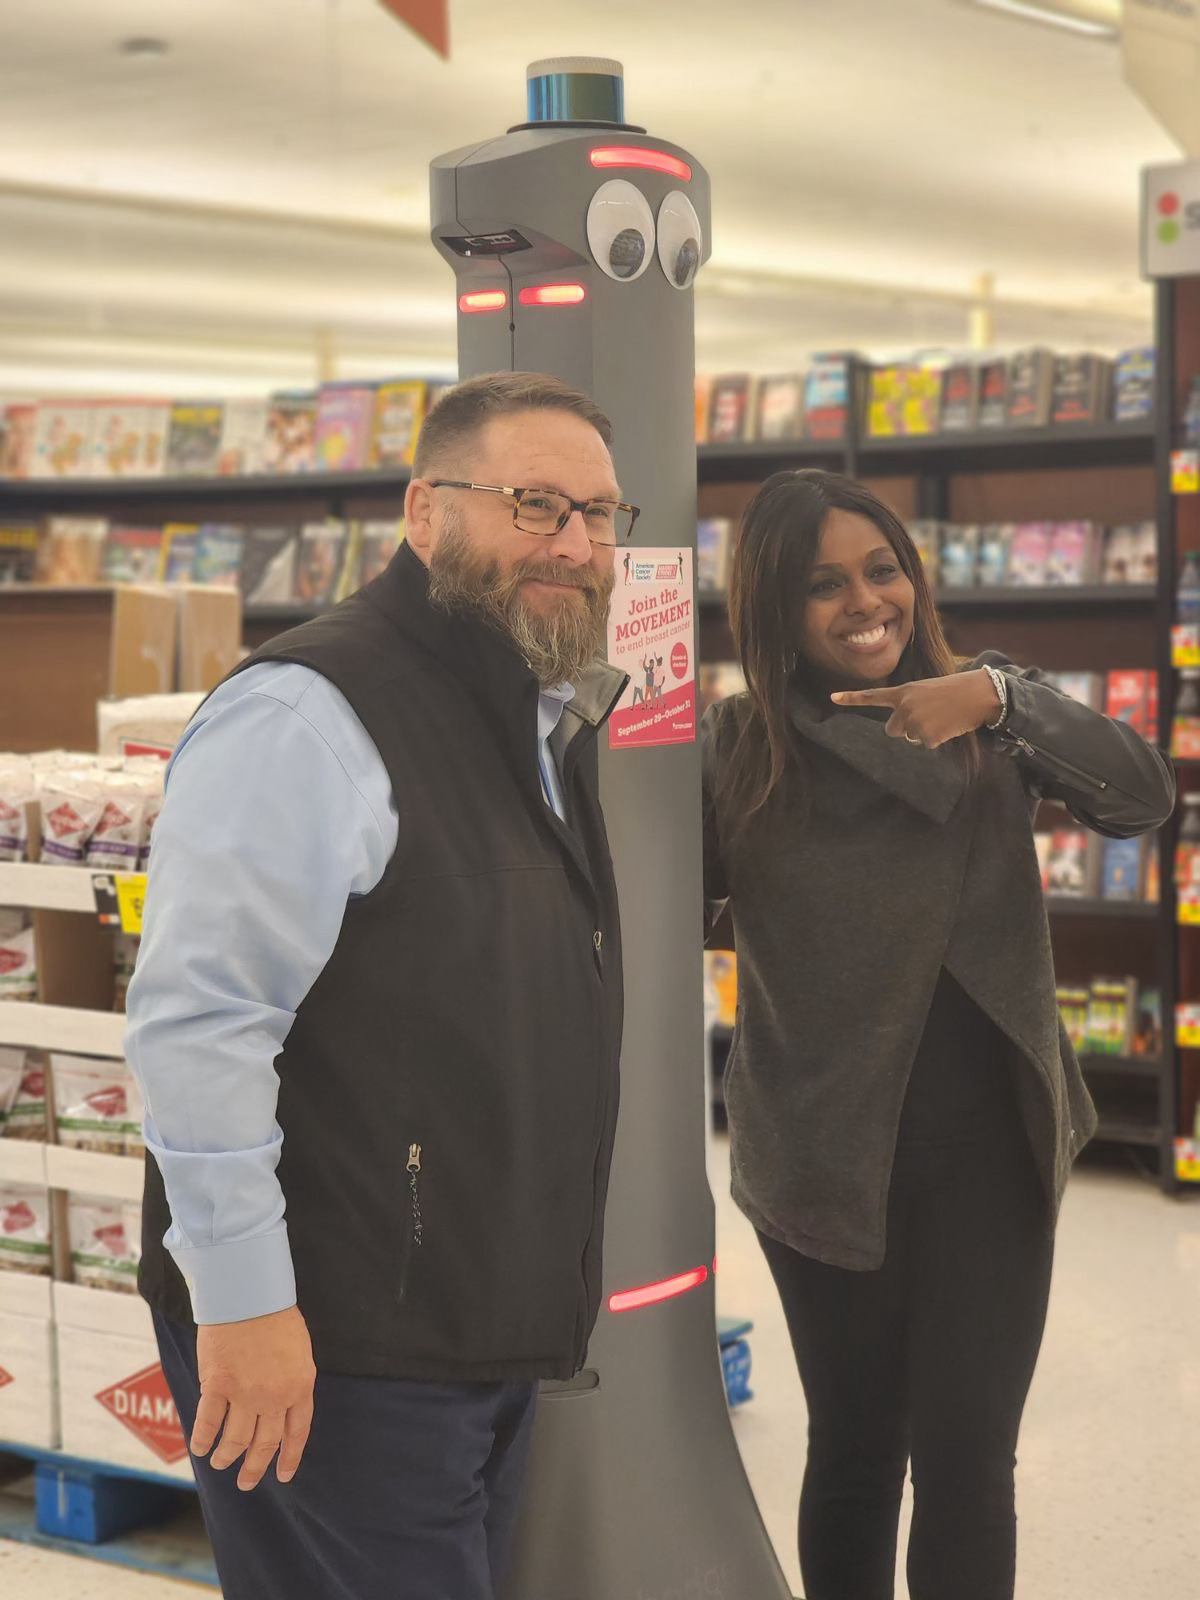 A man and a woman smiling and posing next to a tall, robot-like security device with eyes, inside a supermarket aisle.